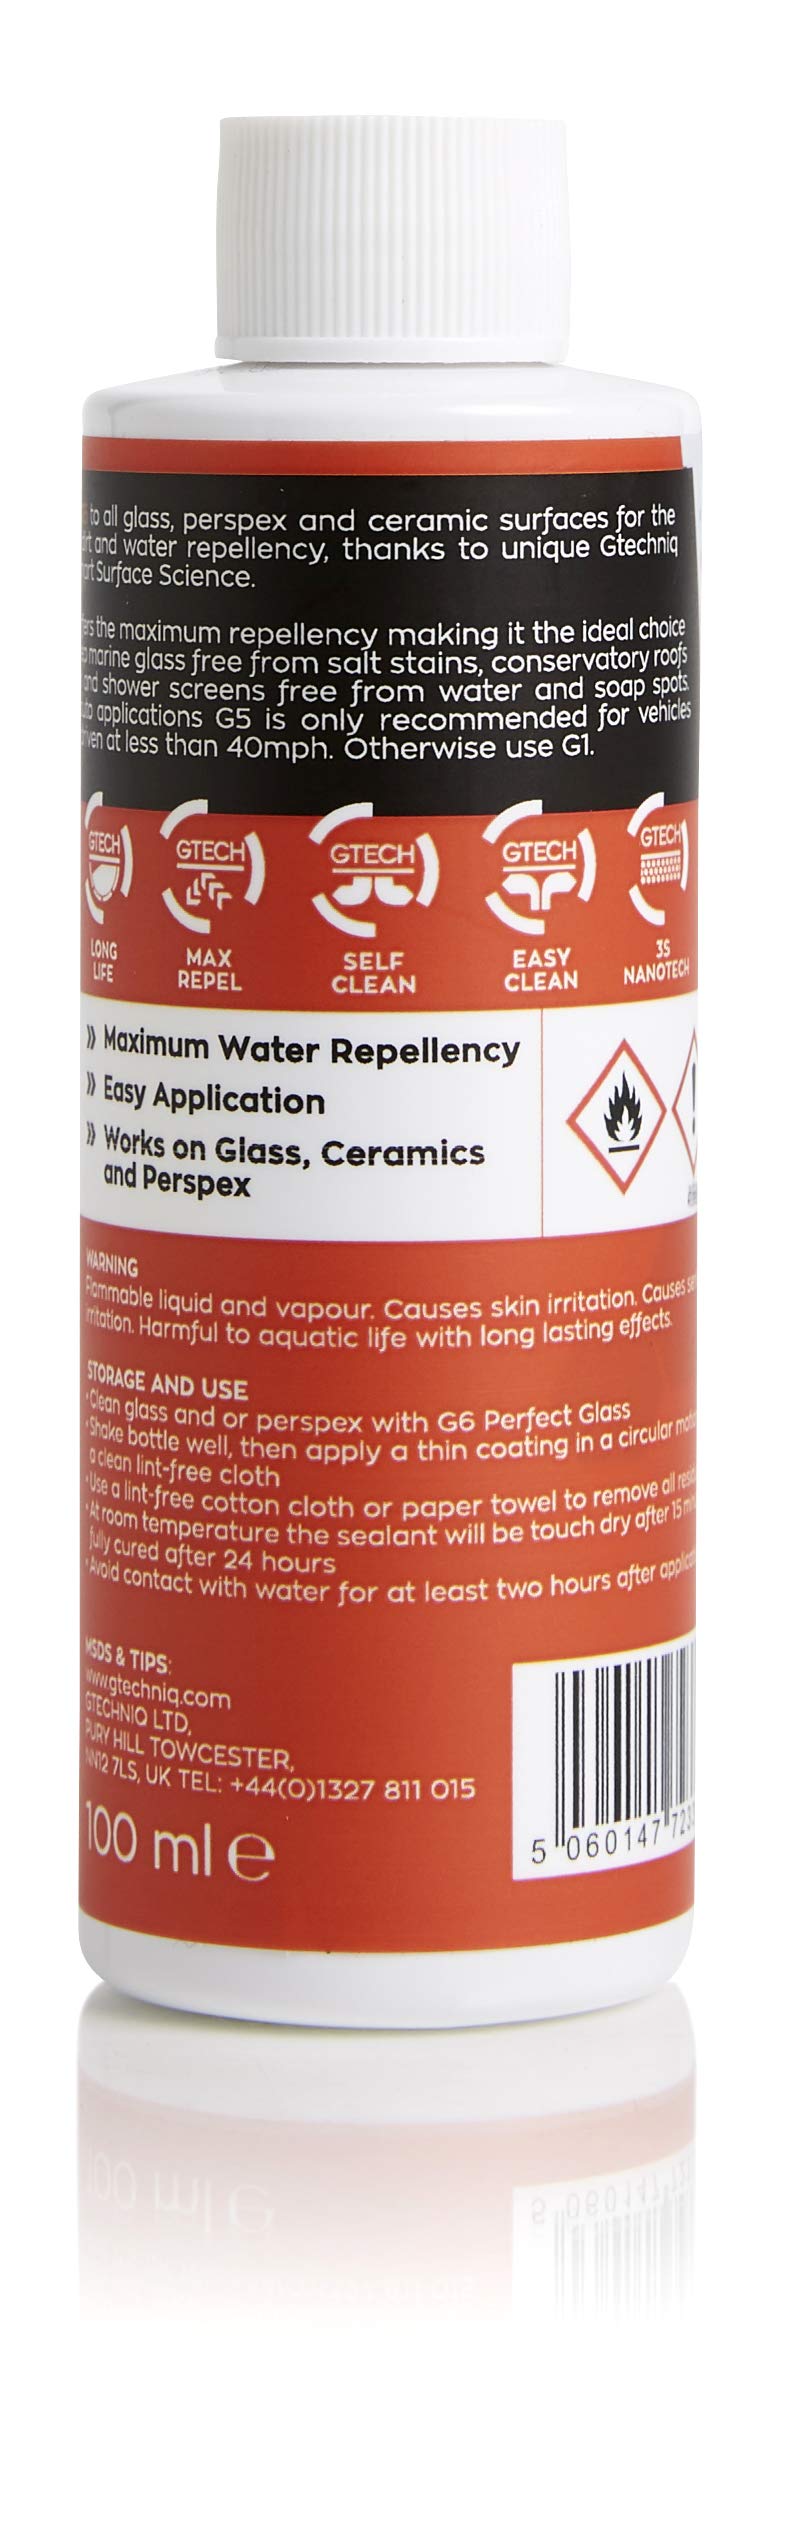  [AUSTRALIA] - Gtechniq G5 Water Repellent Coating for Glass and Perspex 100ml